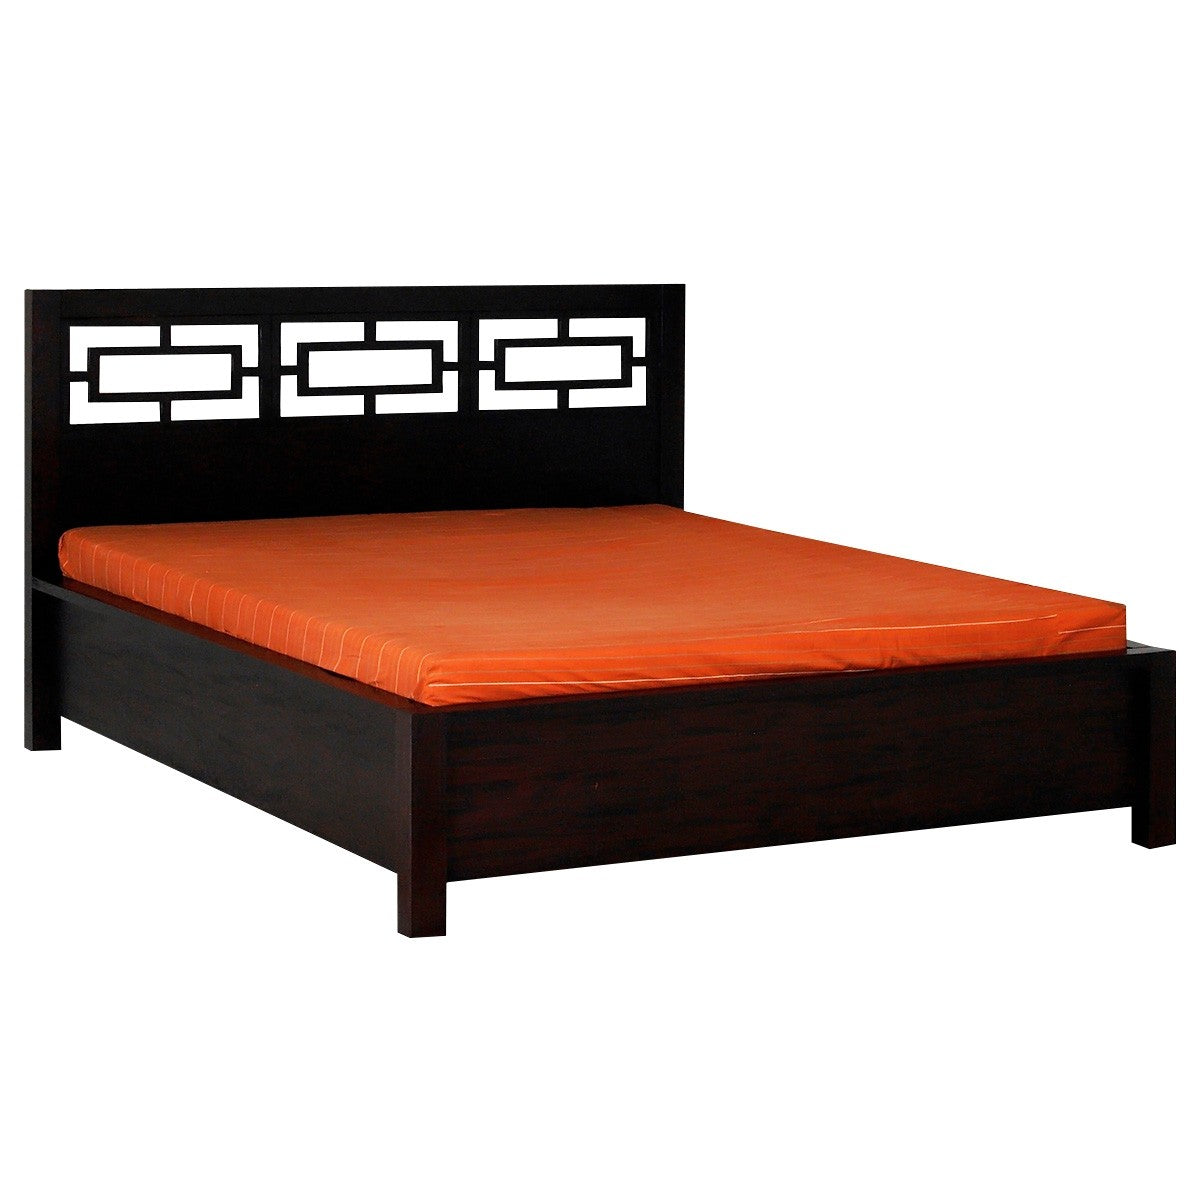 Asian Oriental Solid Teak Timber Queen Size Bed - Chocolate TWS899bs-000-ori-_c_